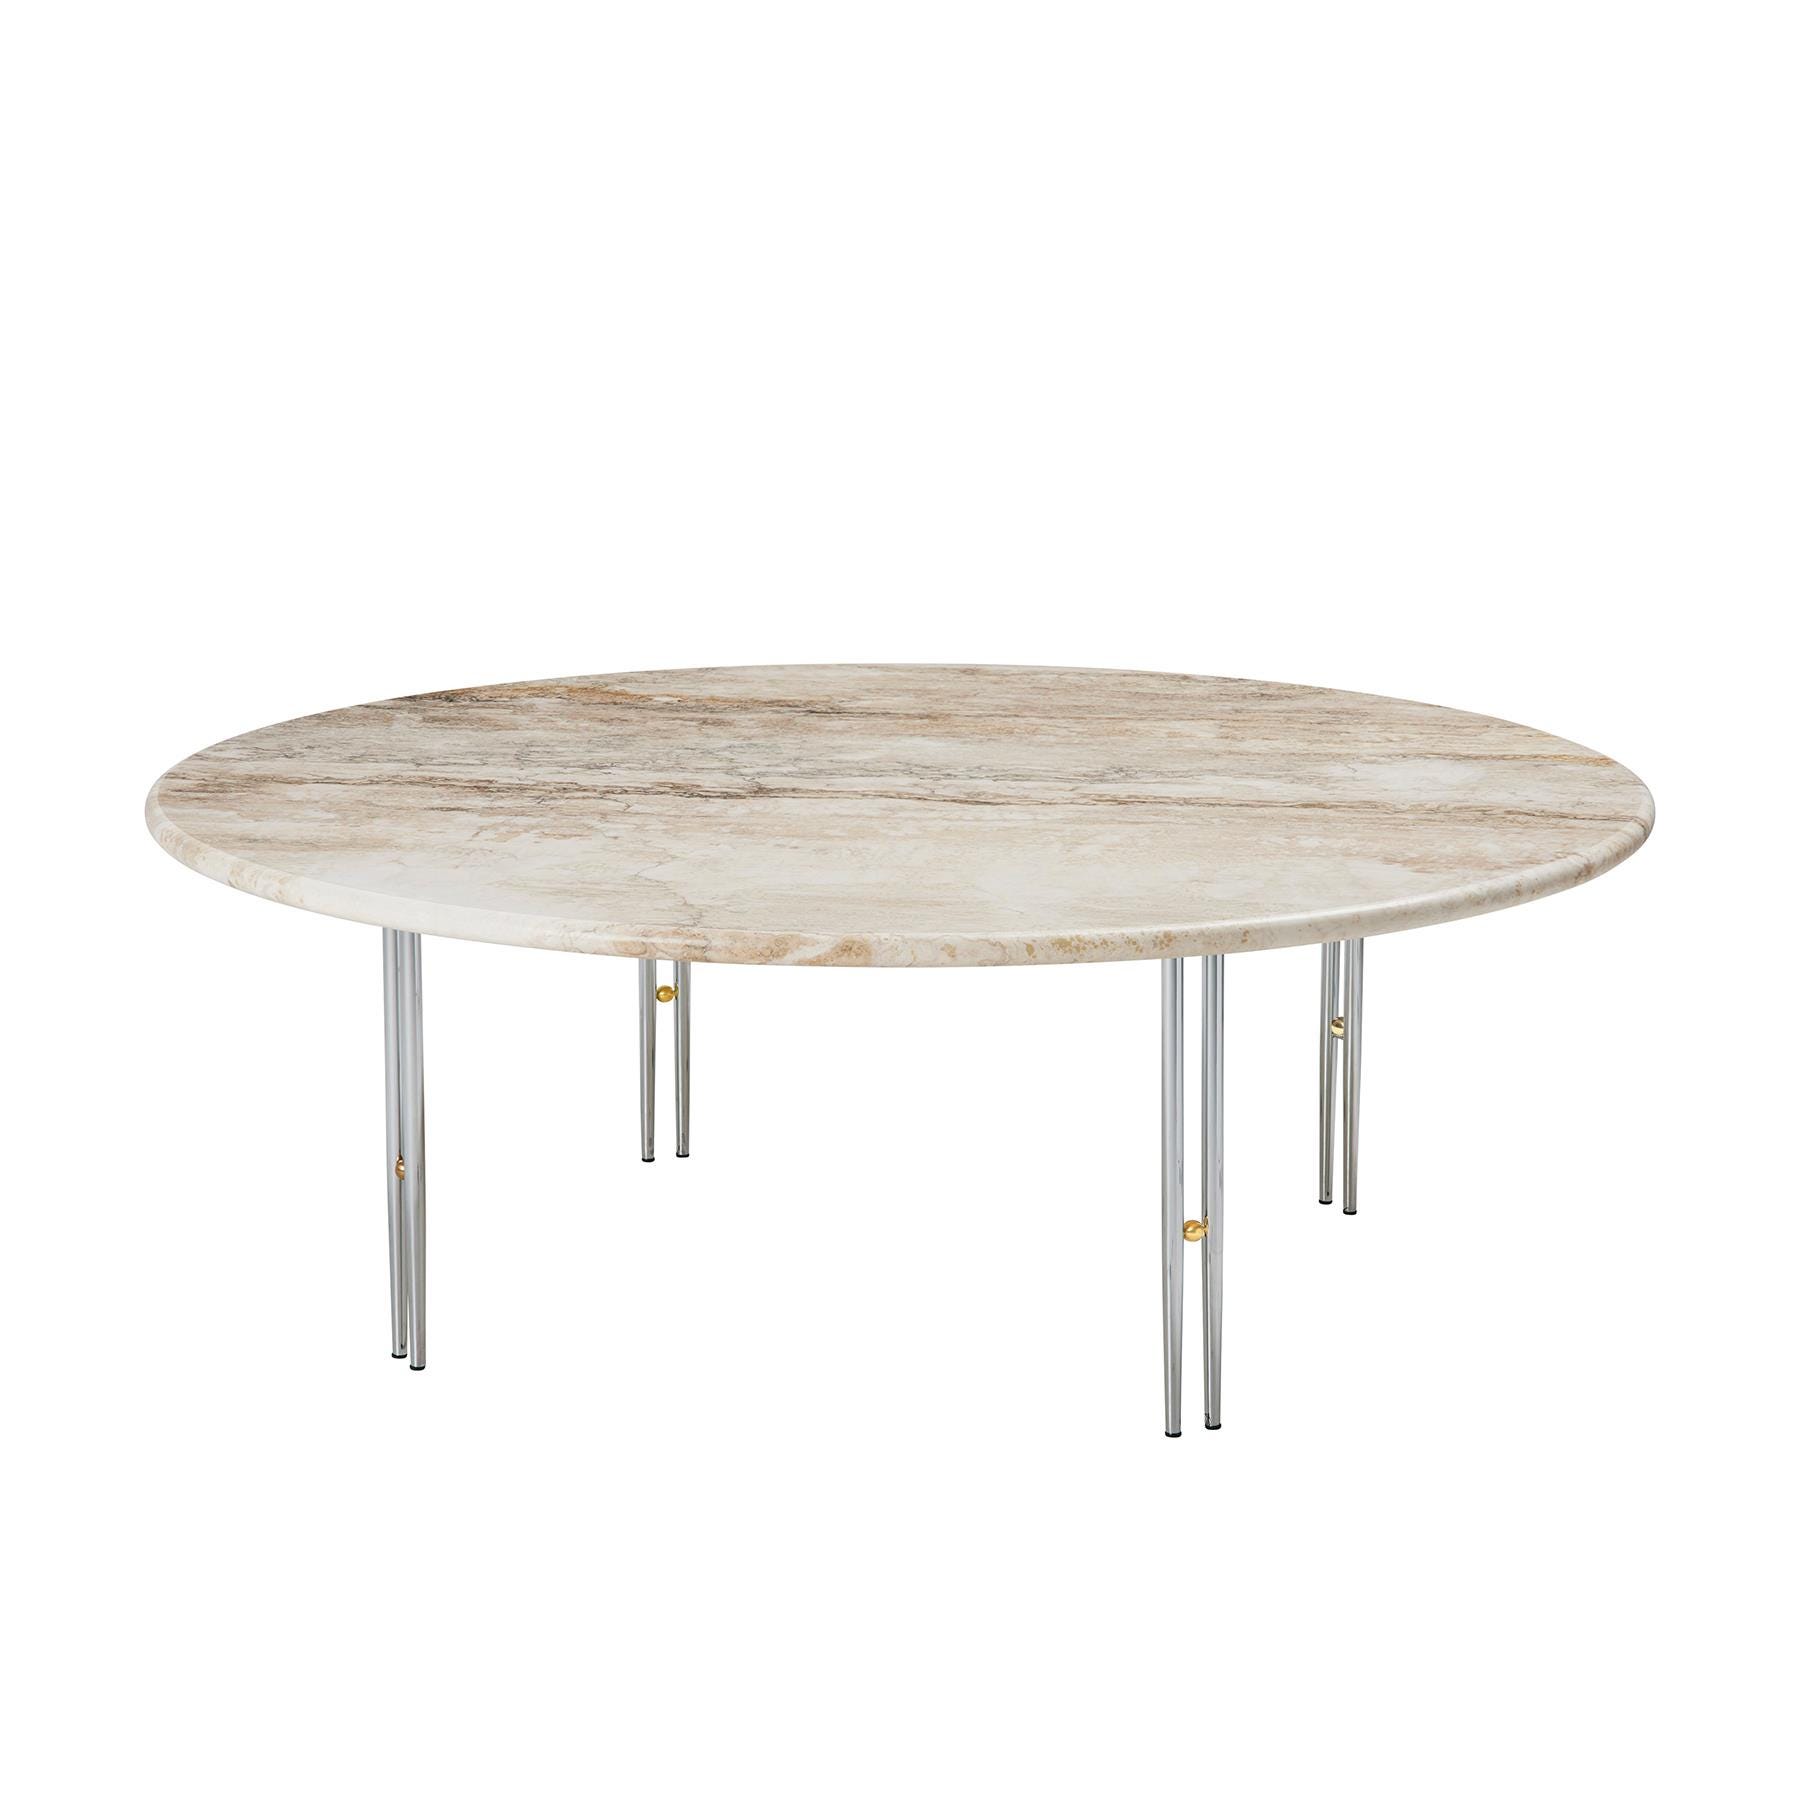 Gubi Ioi Coffee Table 100cm Chrome Base Rippled Beige Grey Designer Furniture From Holloways Of Ludlow